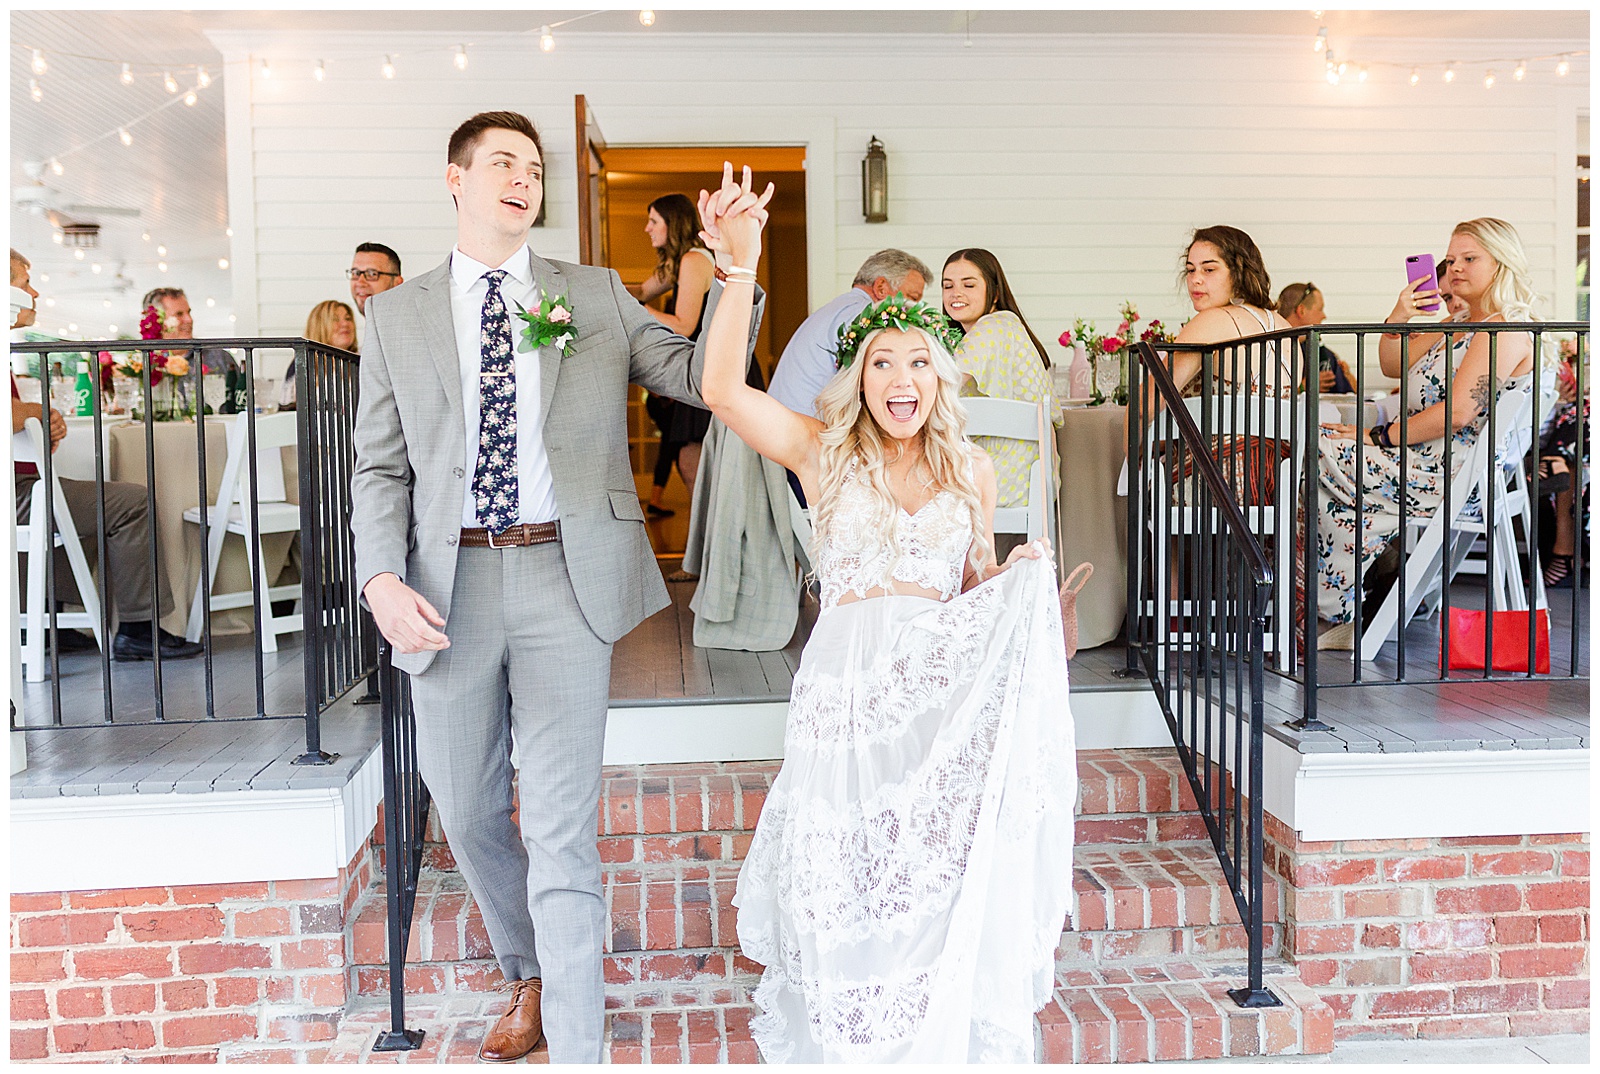 Emotional Bohemian Bride Ceremony from Boho Chic Summer Wedding in Charlotte, NC | check out the full wedding at KevynDixonPhoto.com 